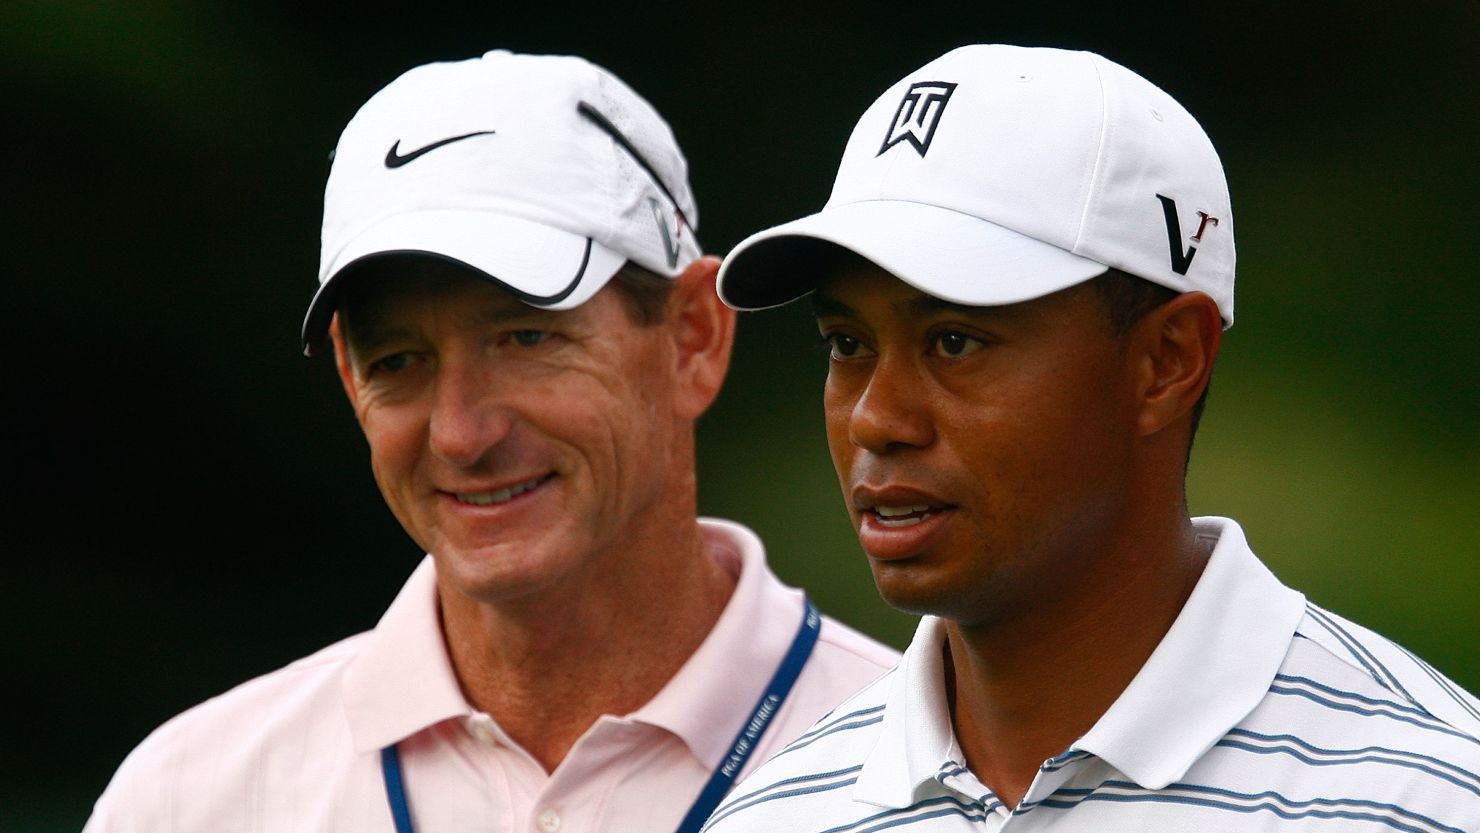 Tiger Woods and former swing coach Hank Haney at the PGA Championship at Hazeltine Golf Club in August 2009.